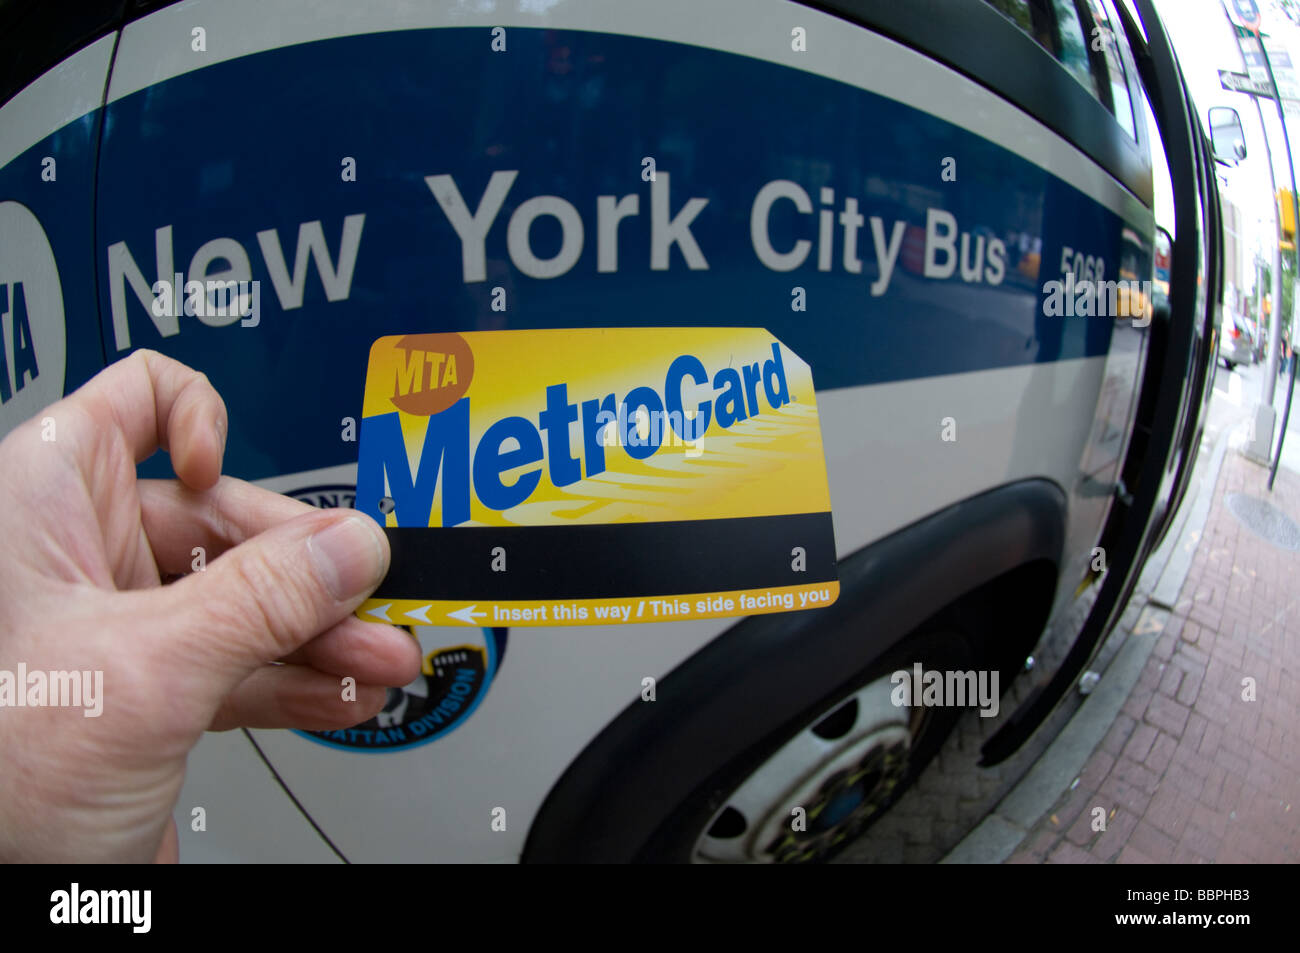 A New York City MTA metrocard in front of a New York City bus on Saturday May 23 2009 Frances M Roberts Stock Photo